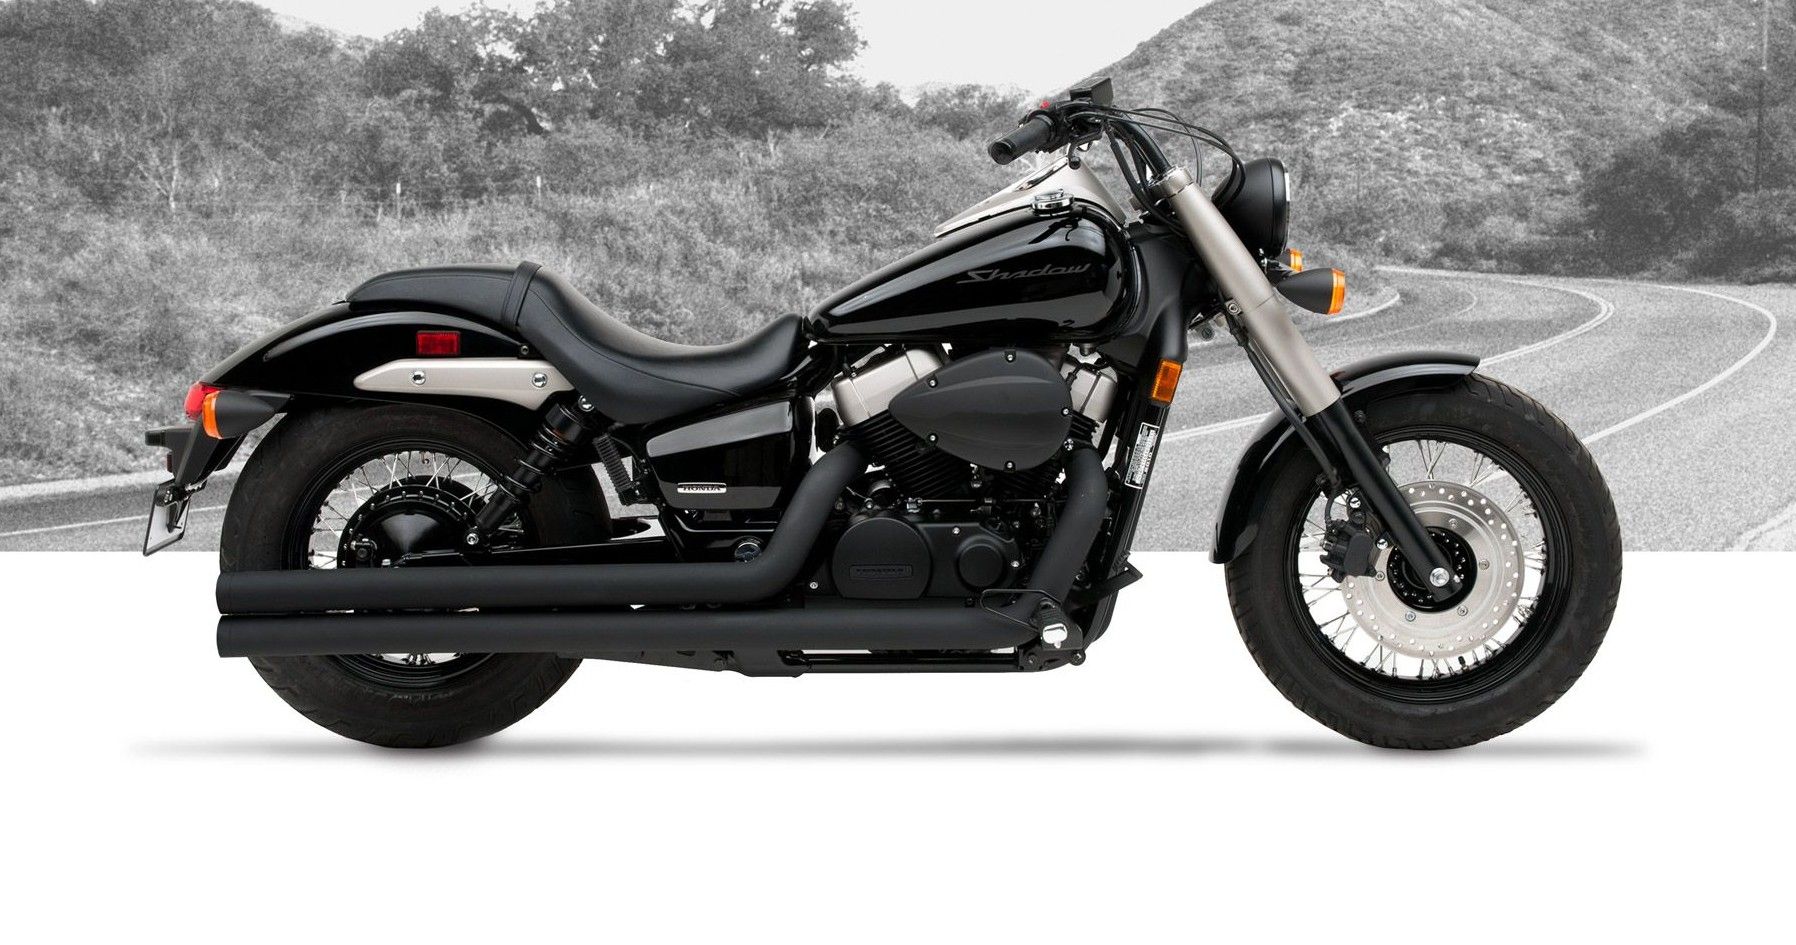 Here's Why The Honda Shadow 750 Could Be Perfect For You